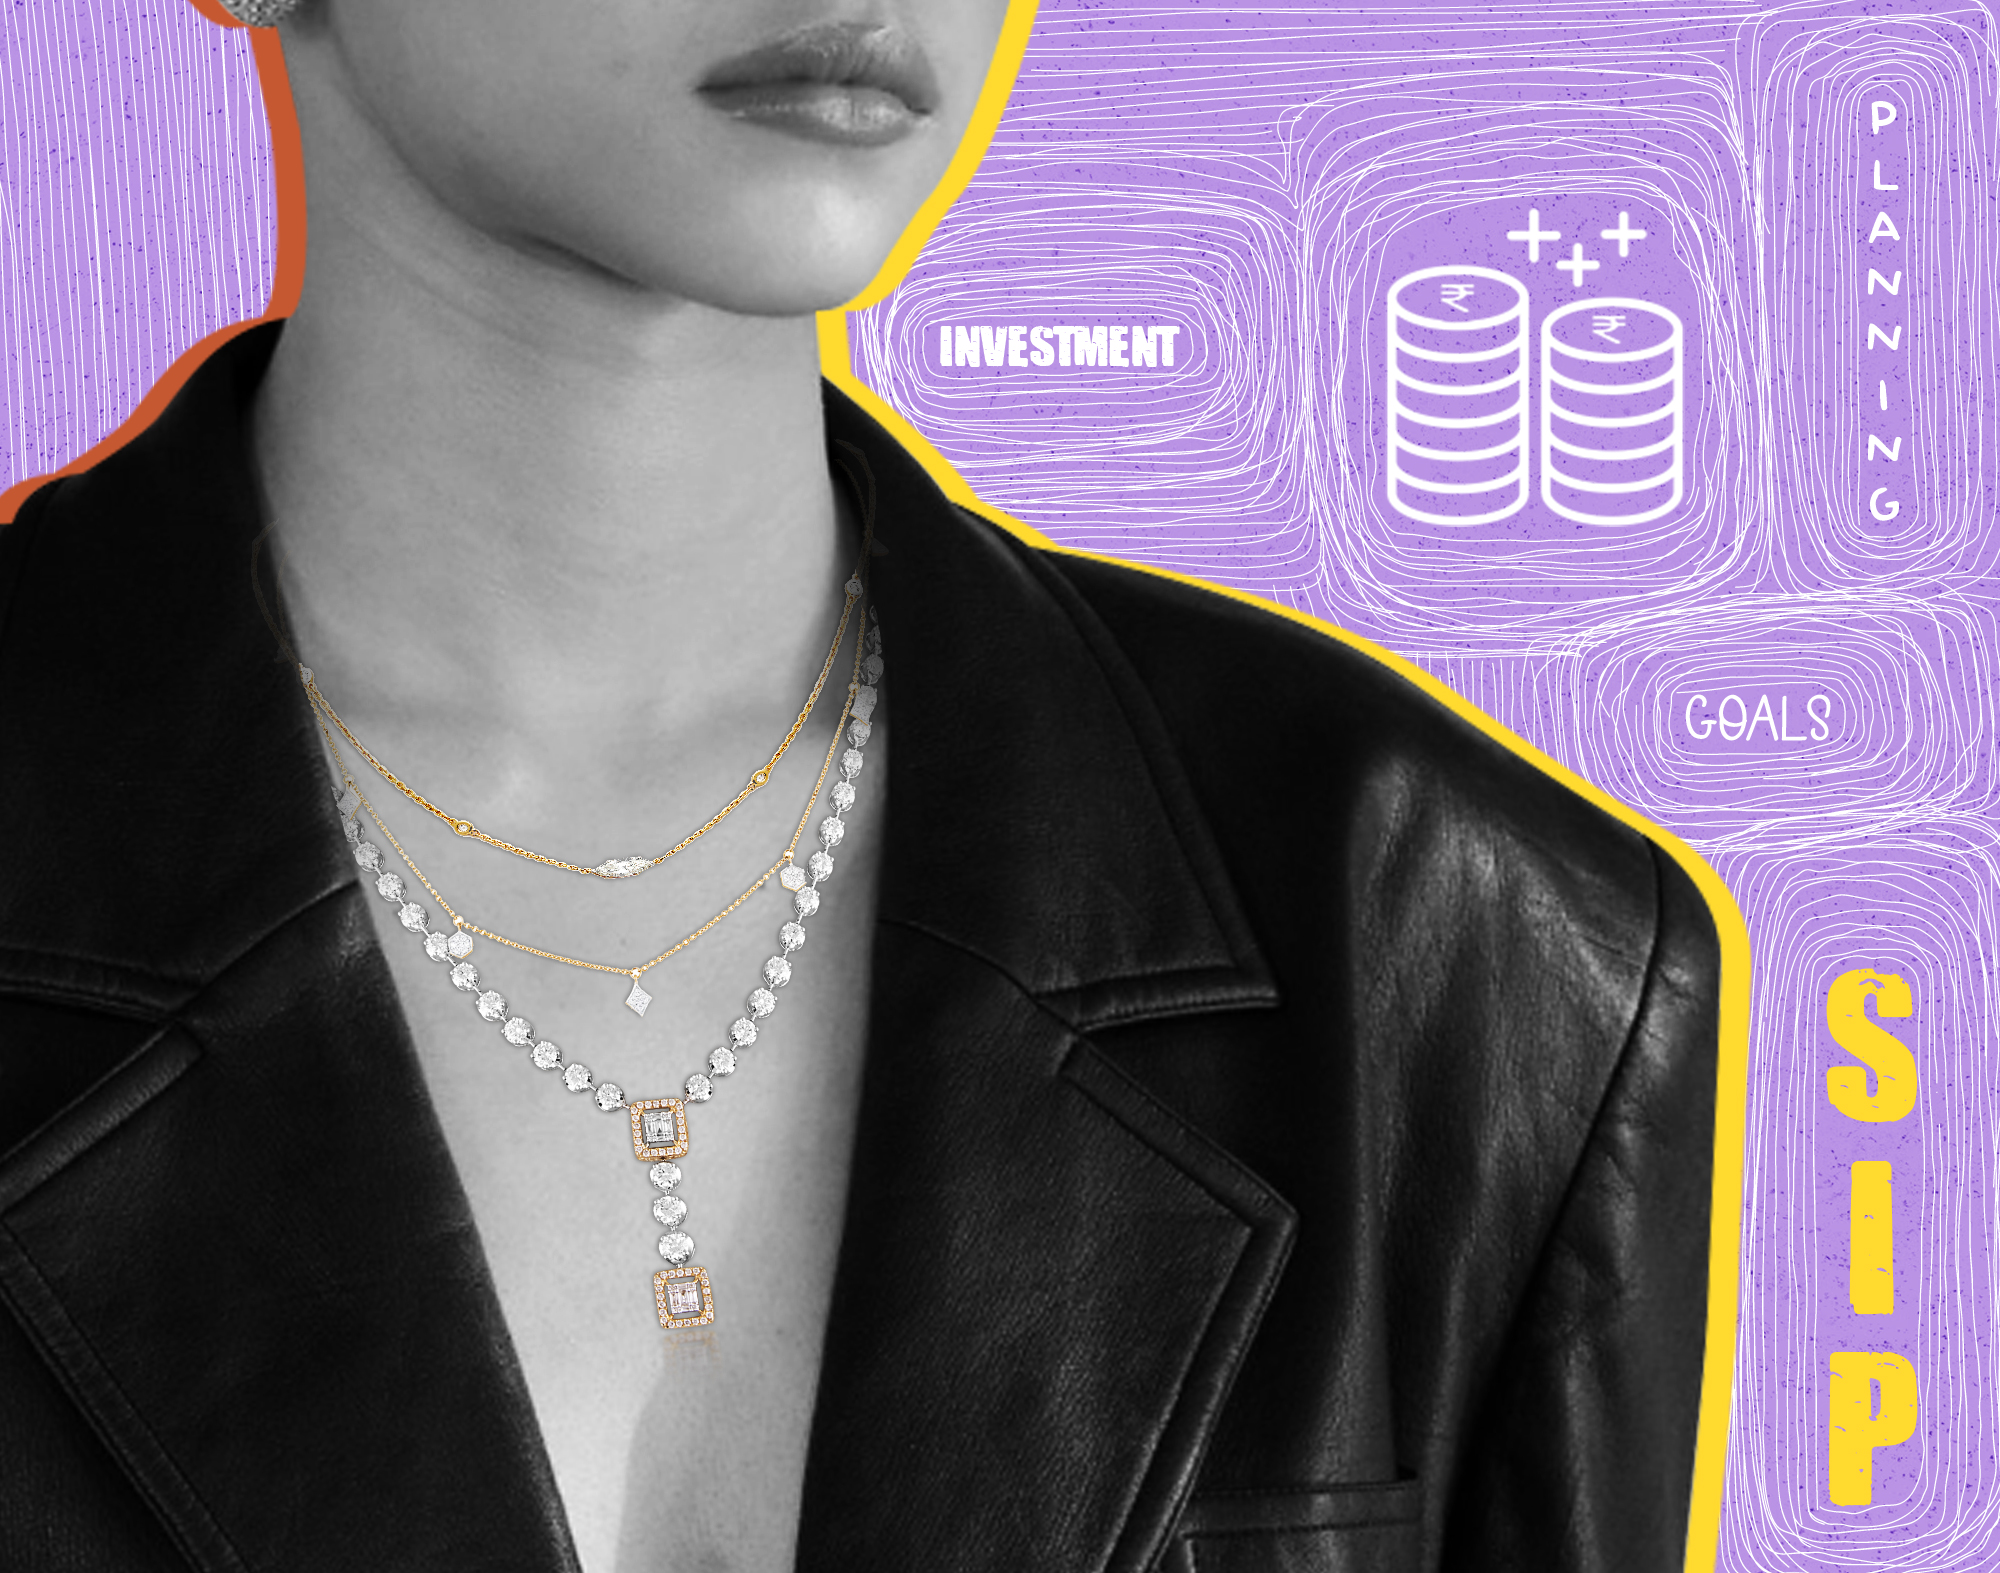 Investing in a diamond necklace